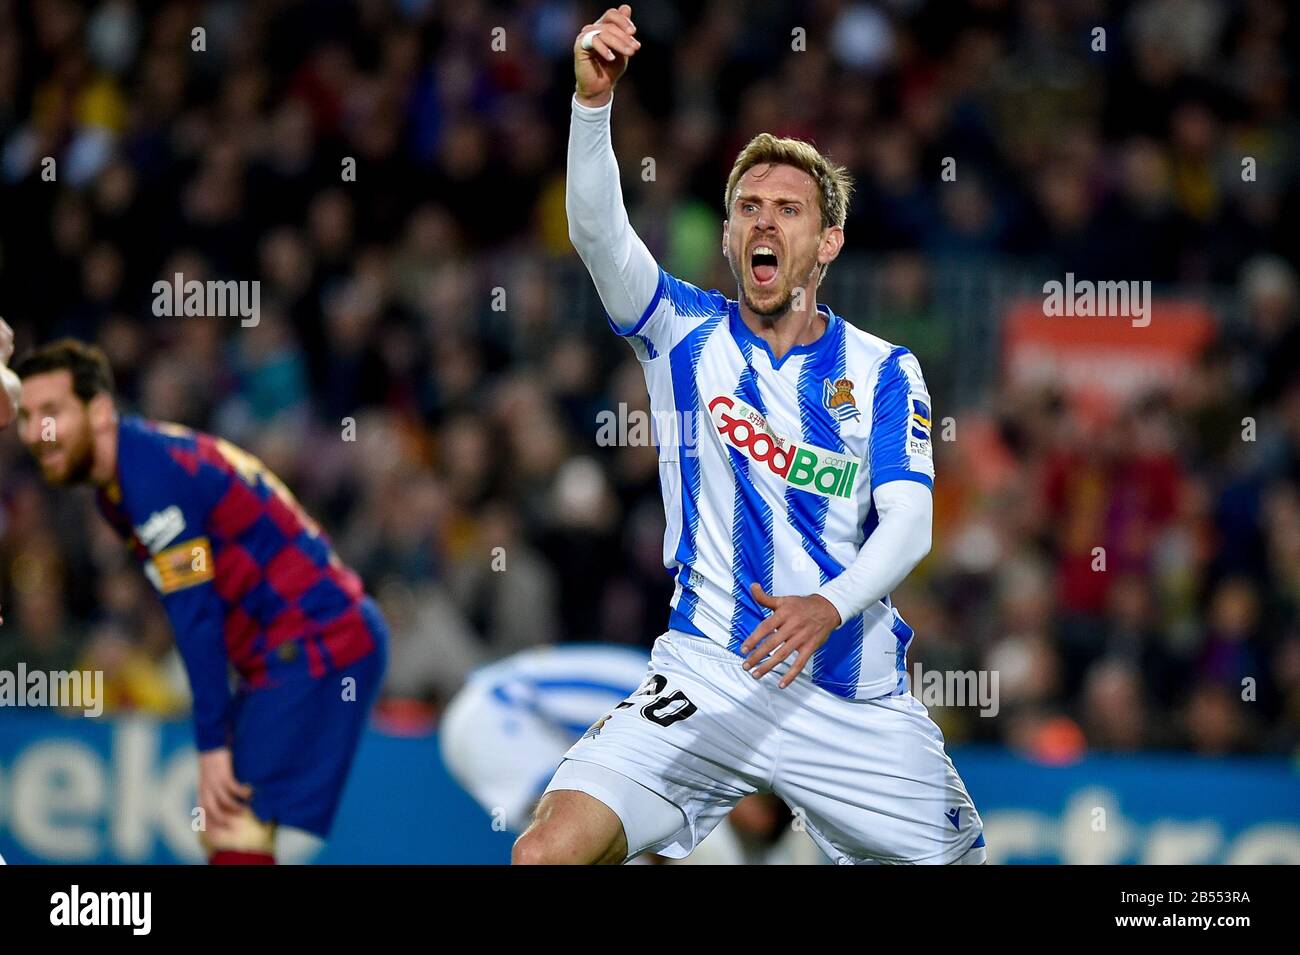 Barcelona, Spain. 07th Mar, 2020. Nacho Monreal of Real Sociedad during the Liga match between FC Barcelona and Real Sociedad at Camp Nou on March 07, 2020 in Barcelona, Spain. Credit: DAX/ESPA/Alamy Live News Stock Photo